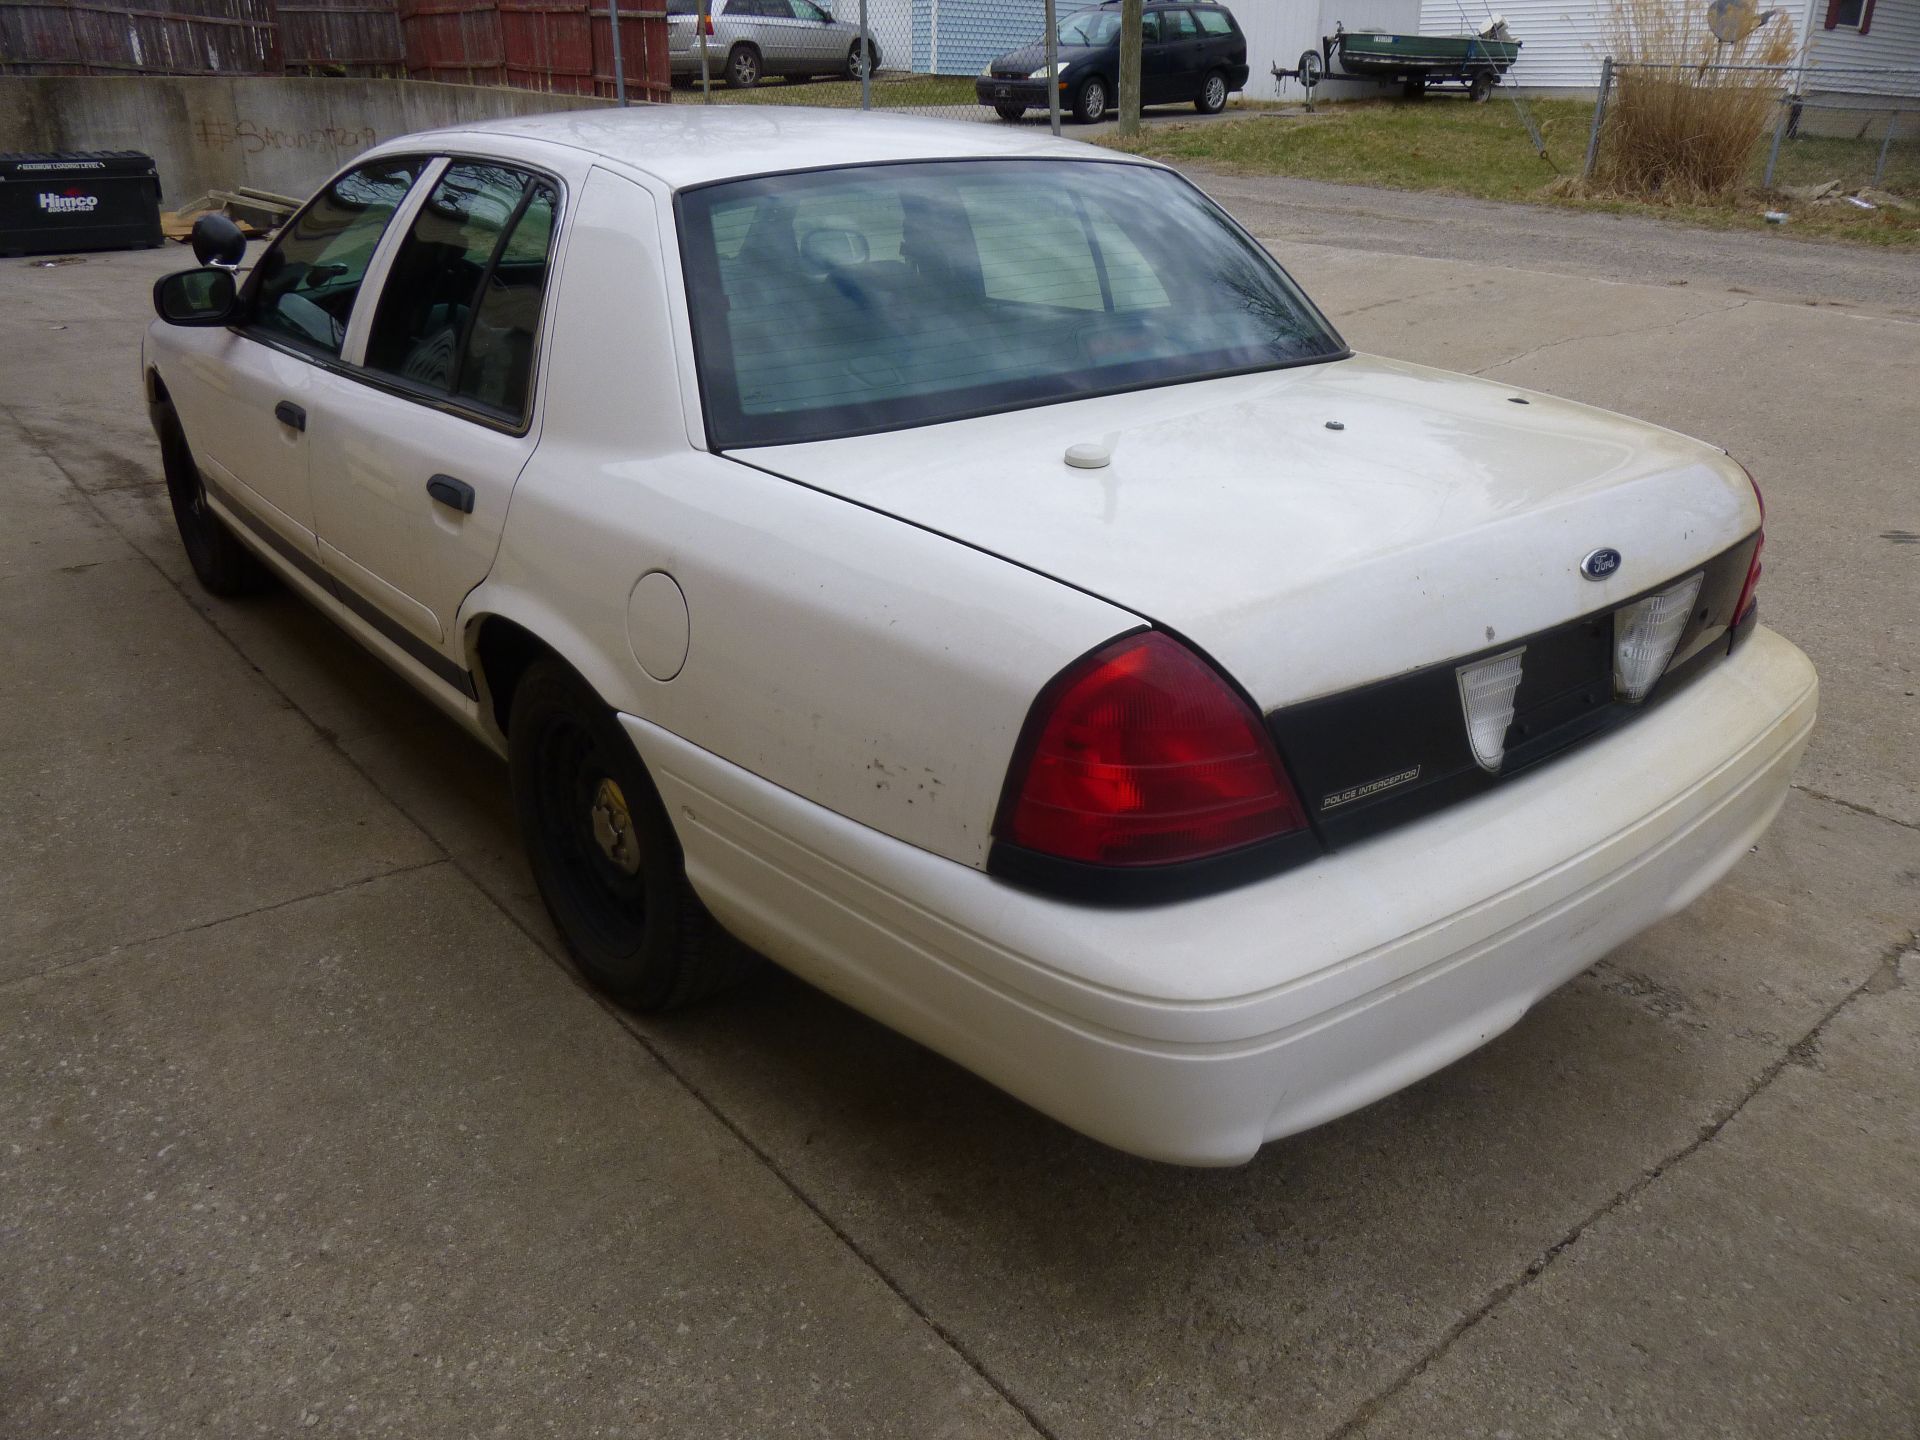 2002 Ford Crown Victoria Police Interceptor miles 112174 Vin # 2FAFP71W32X136232 CLEAR TITLE( - Image 6 of 10